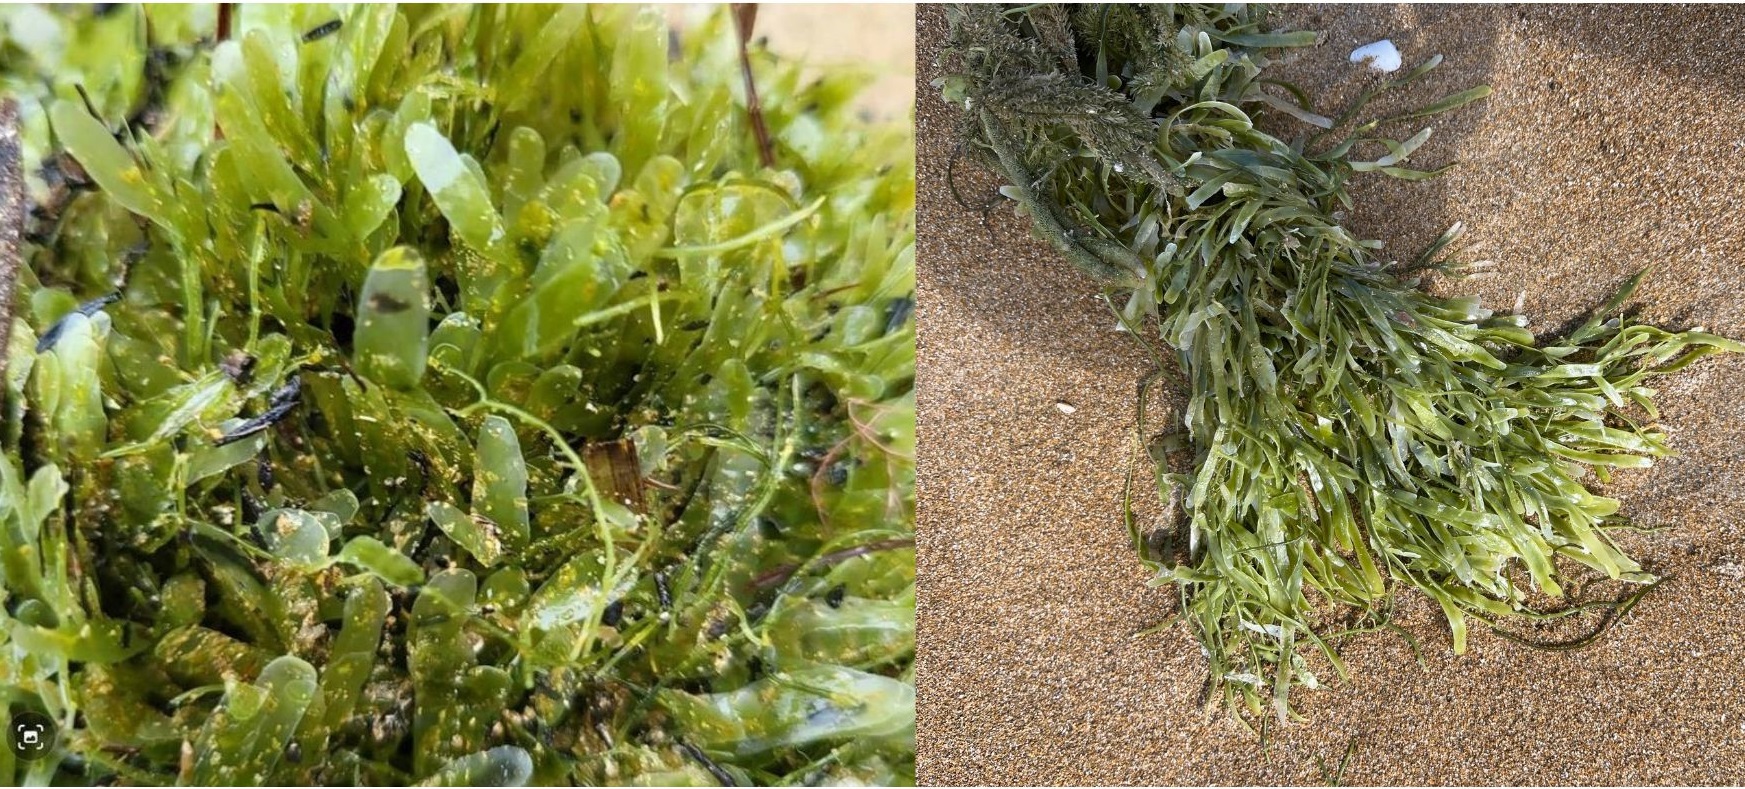 It's important to be able to recognise exotic caulerpa – so you can report it to MPI.